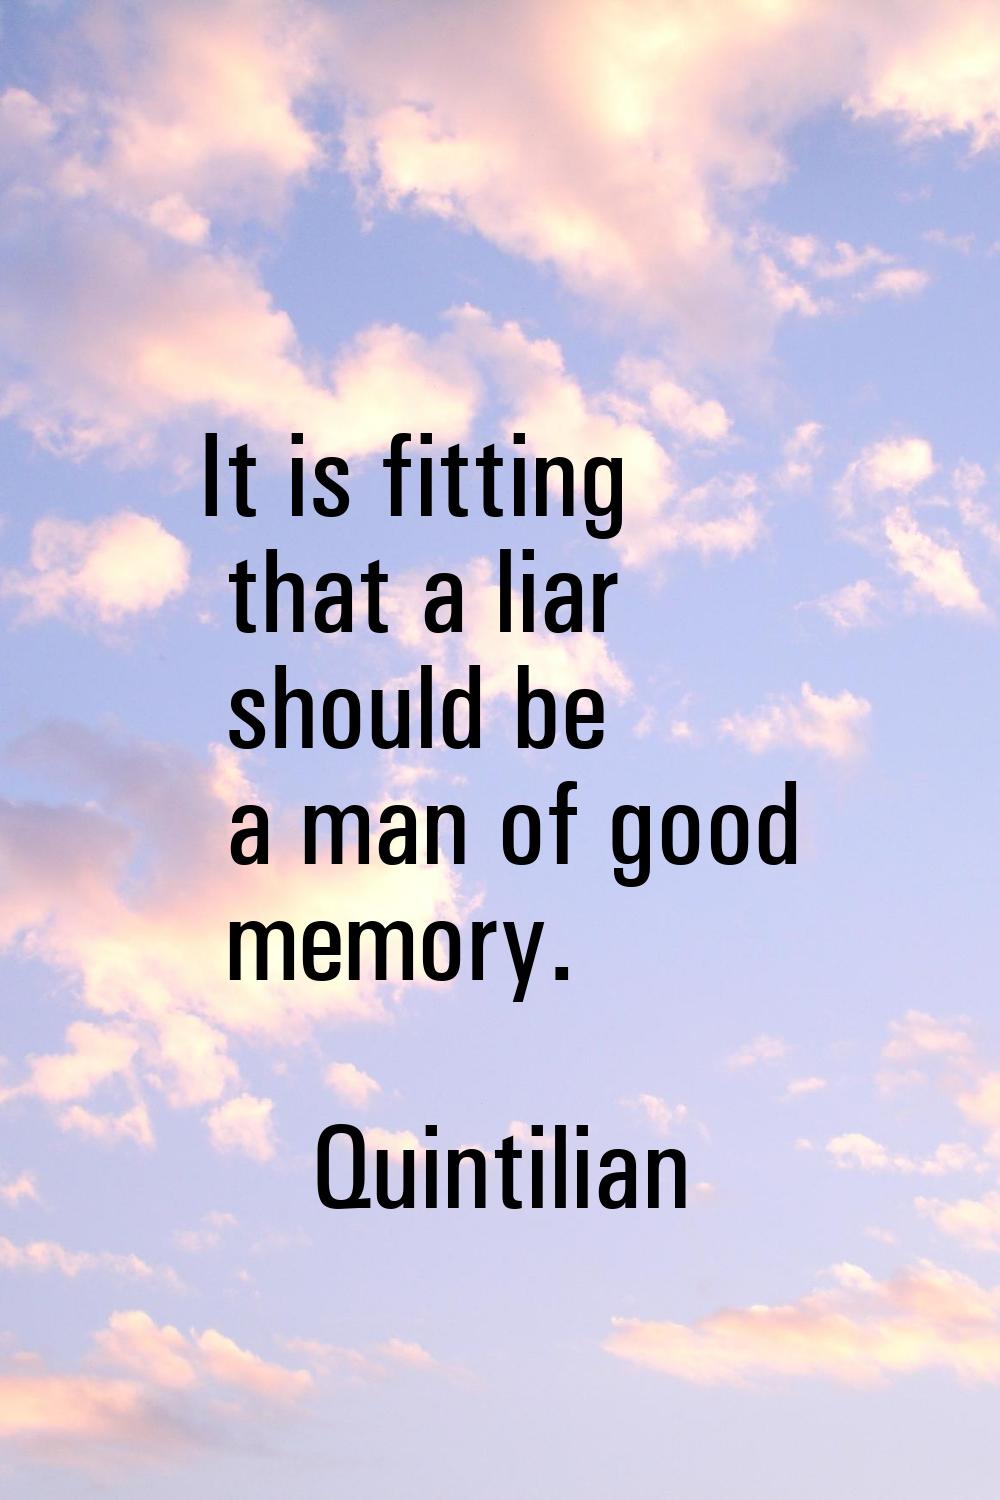 It is fitting that a liar should be a man of good memory.